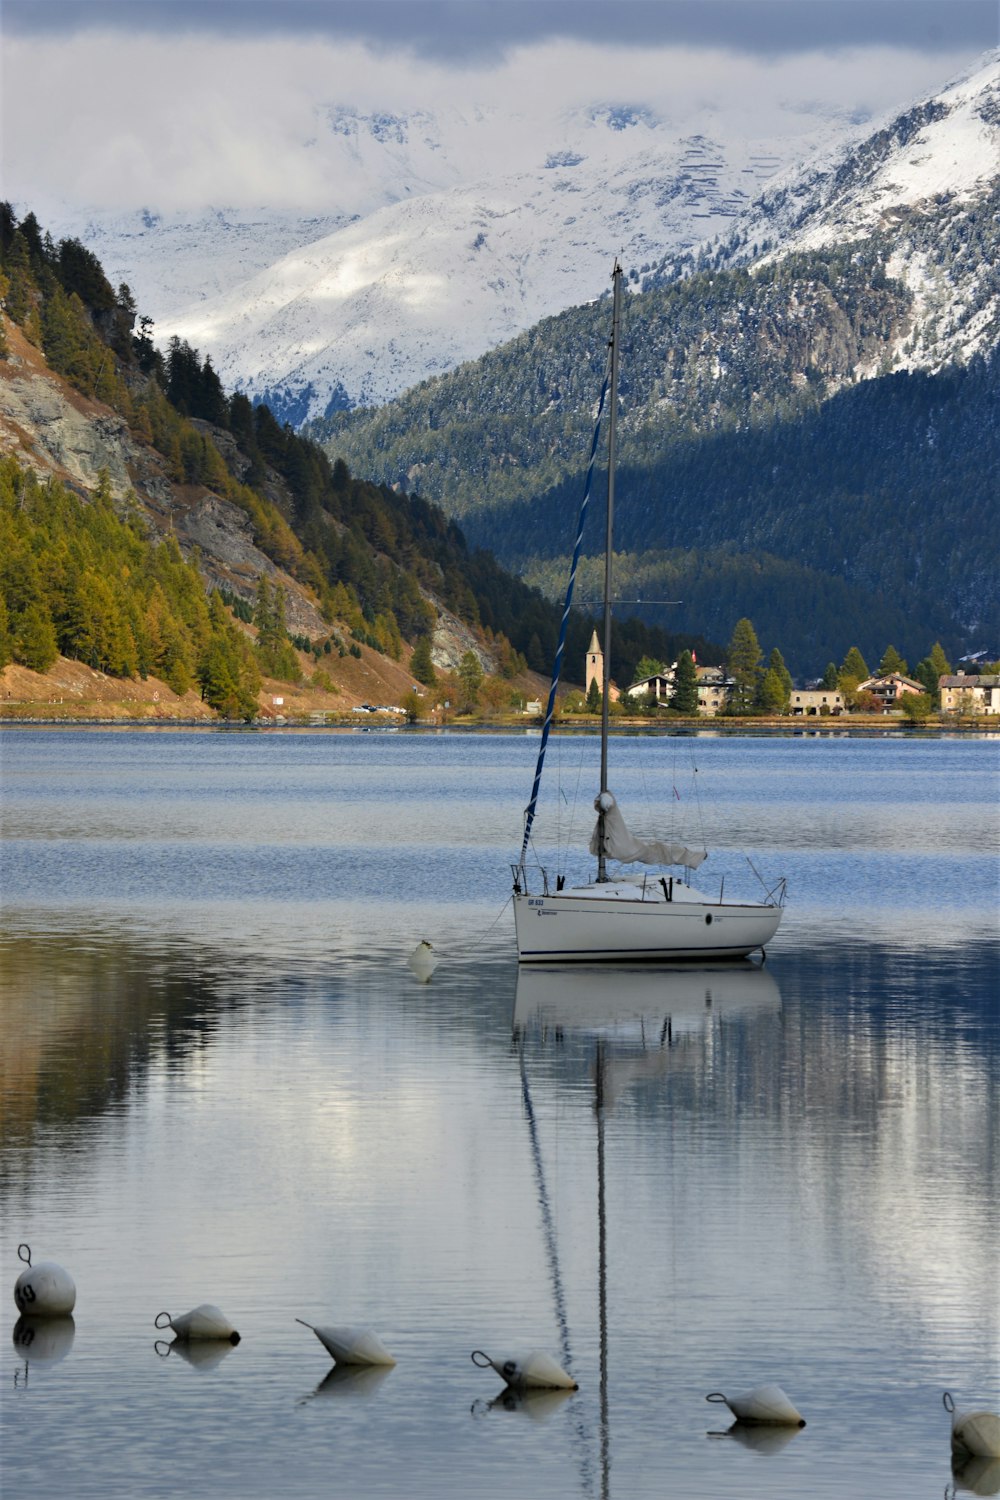 a sailboat on a lake with mountains in the background